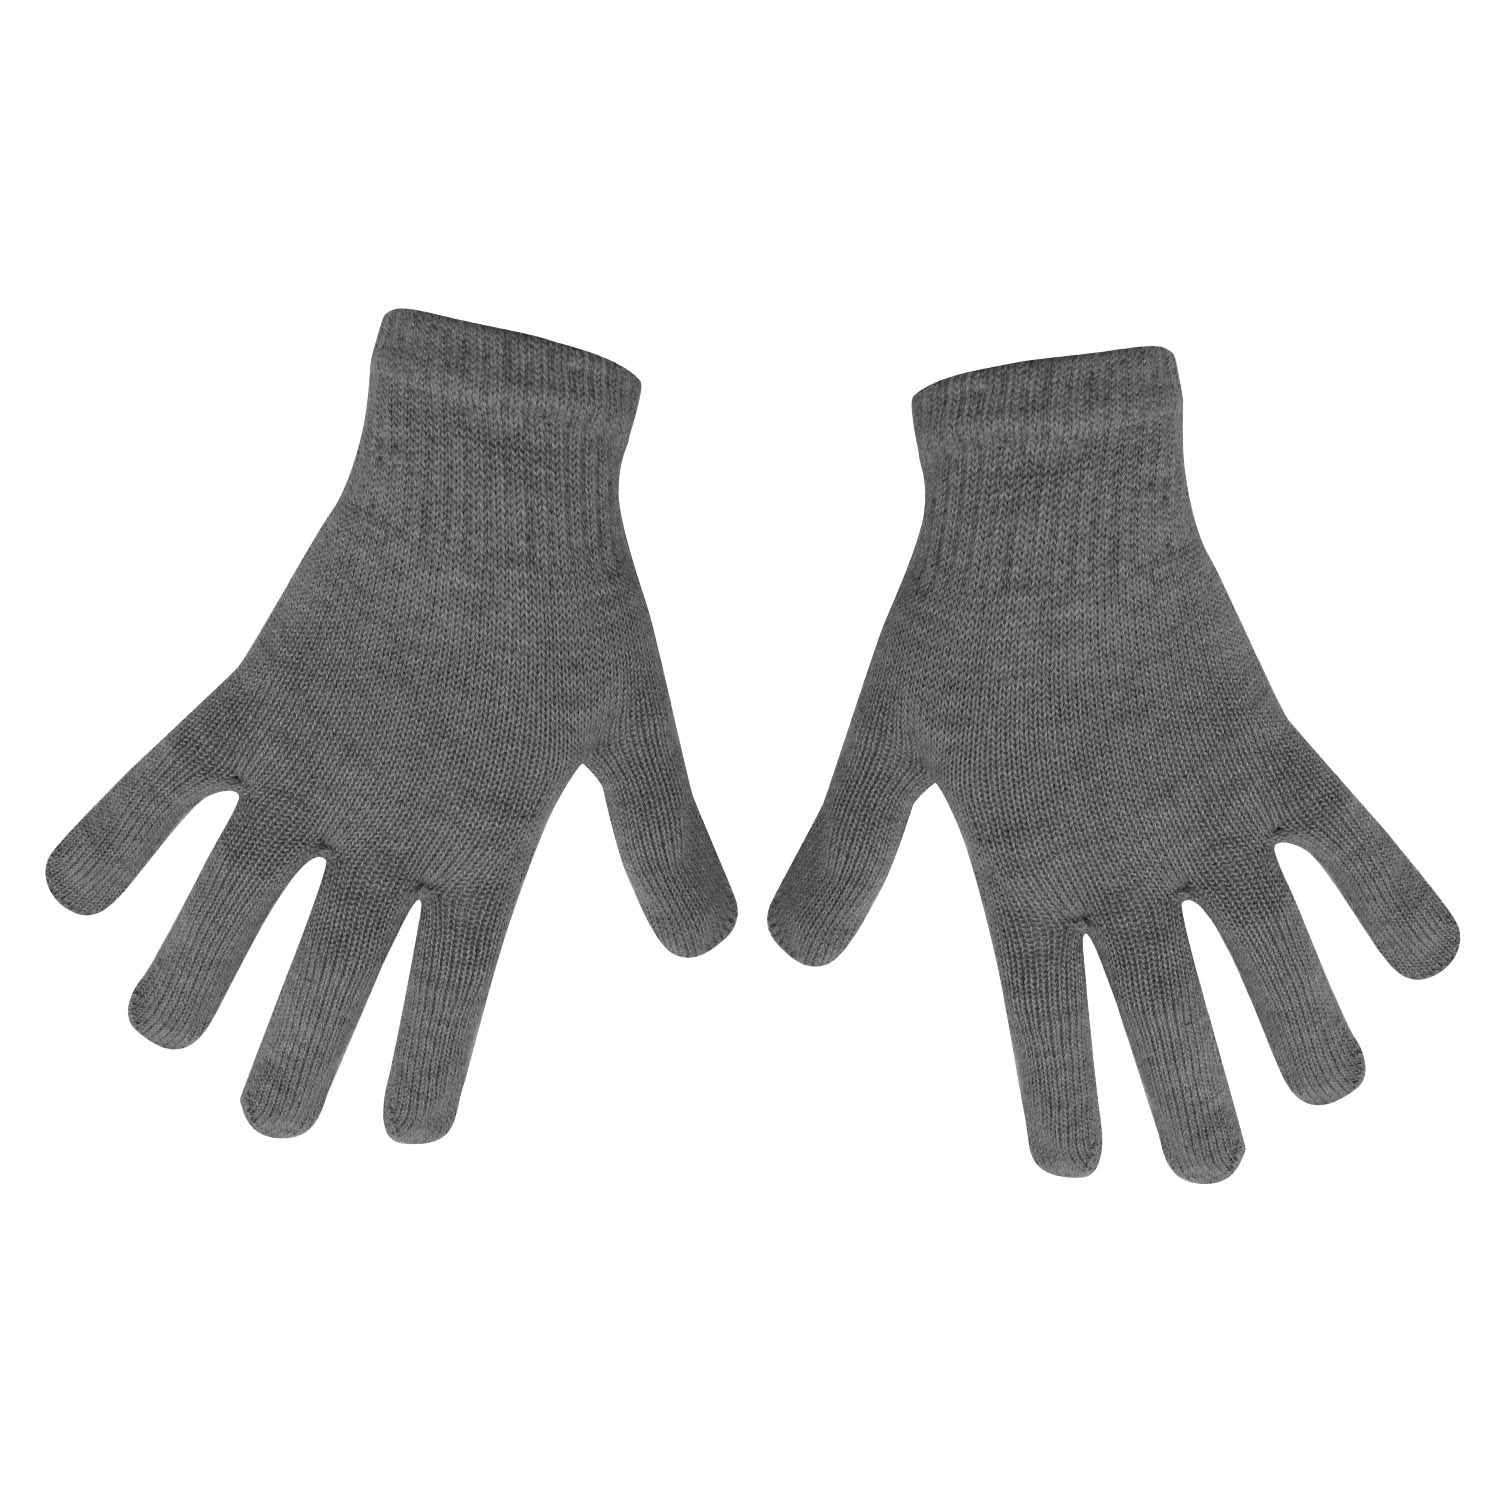 Unisex Bulk Winter Gloves in 5 Assorted Colors - Cold Weather Case of 96 Glove Pairs